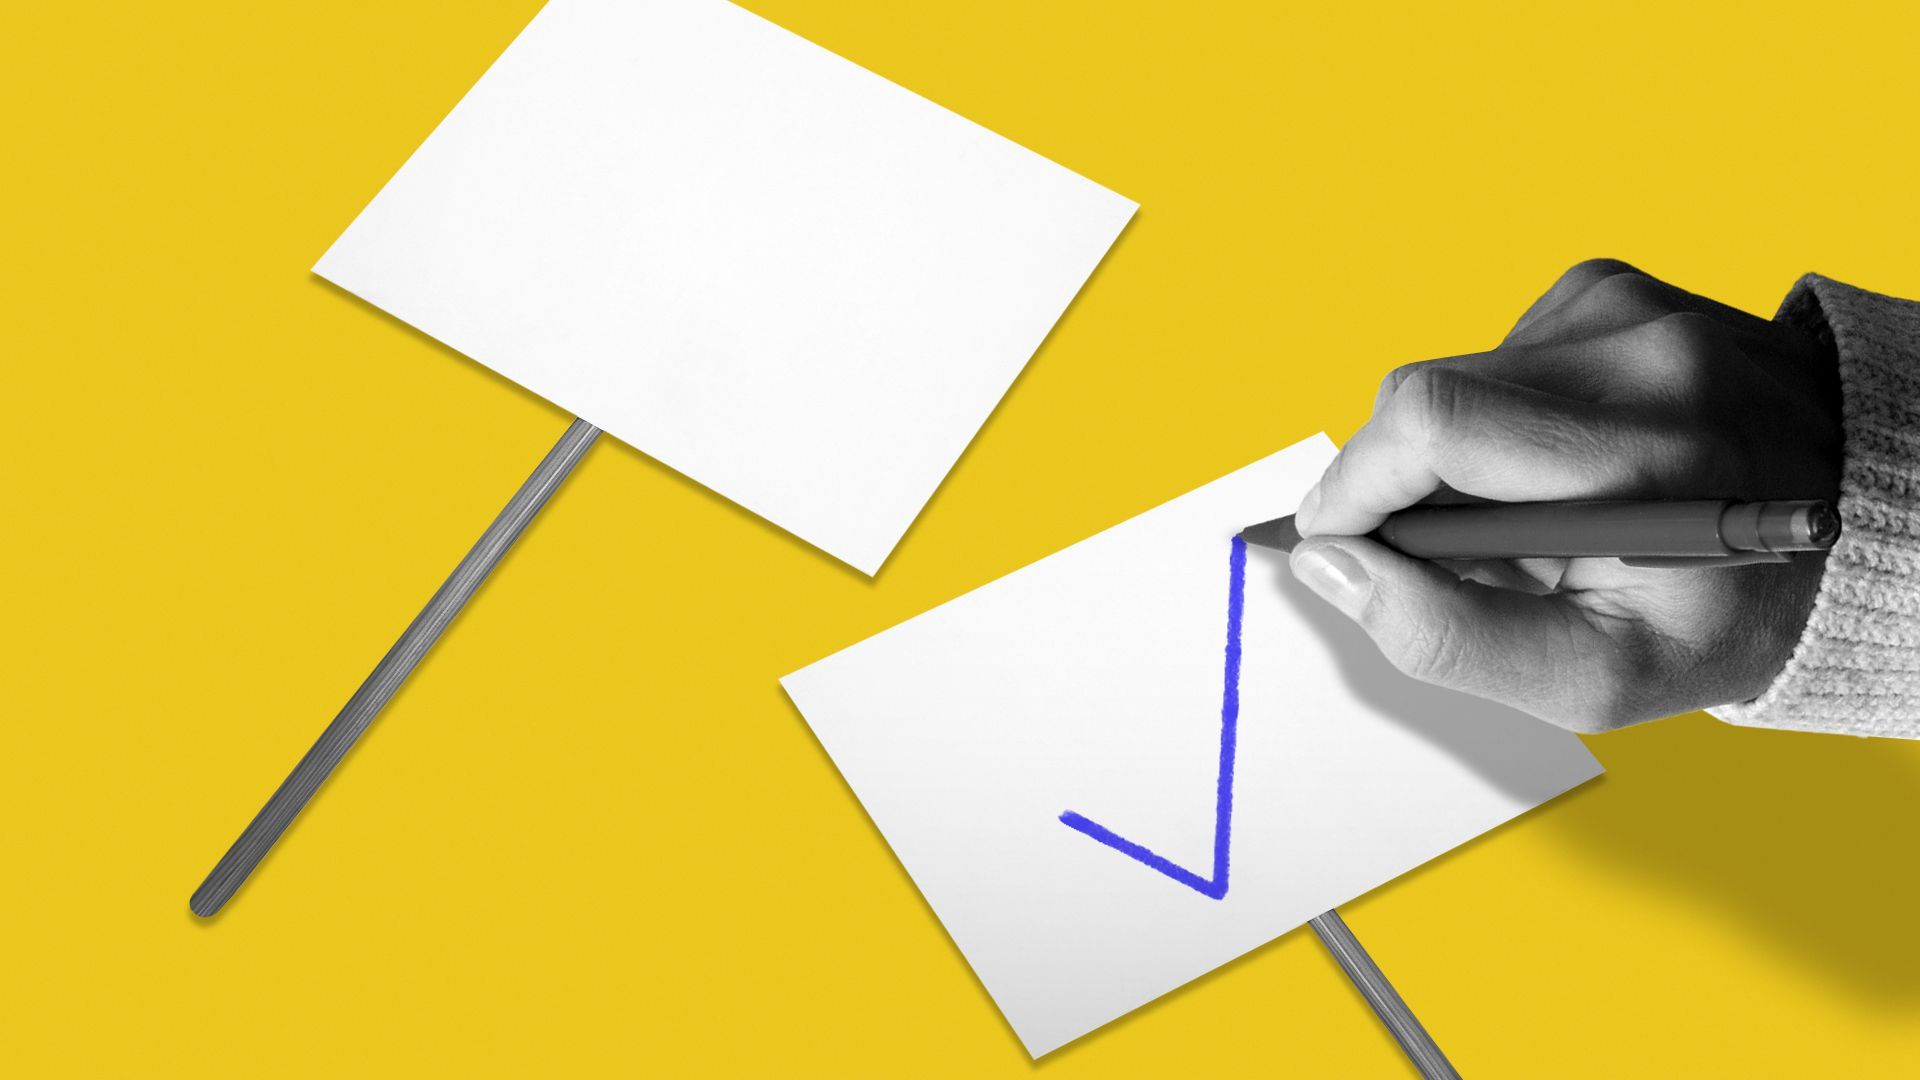 Illustration of two protest signs laid down with a large hand marking one sign with a blue checkmark, resembling a ballot vote